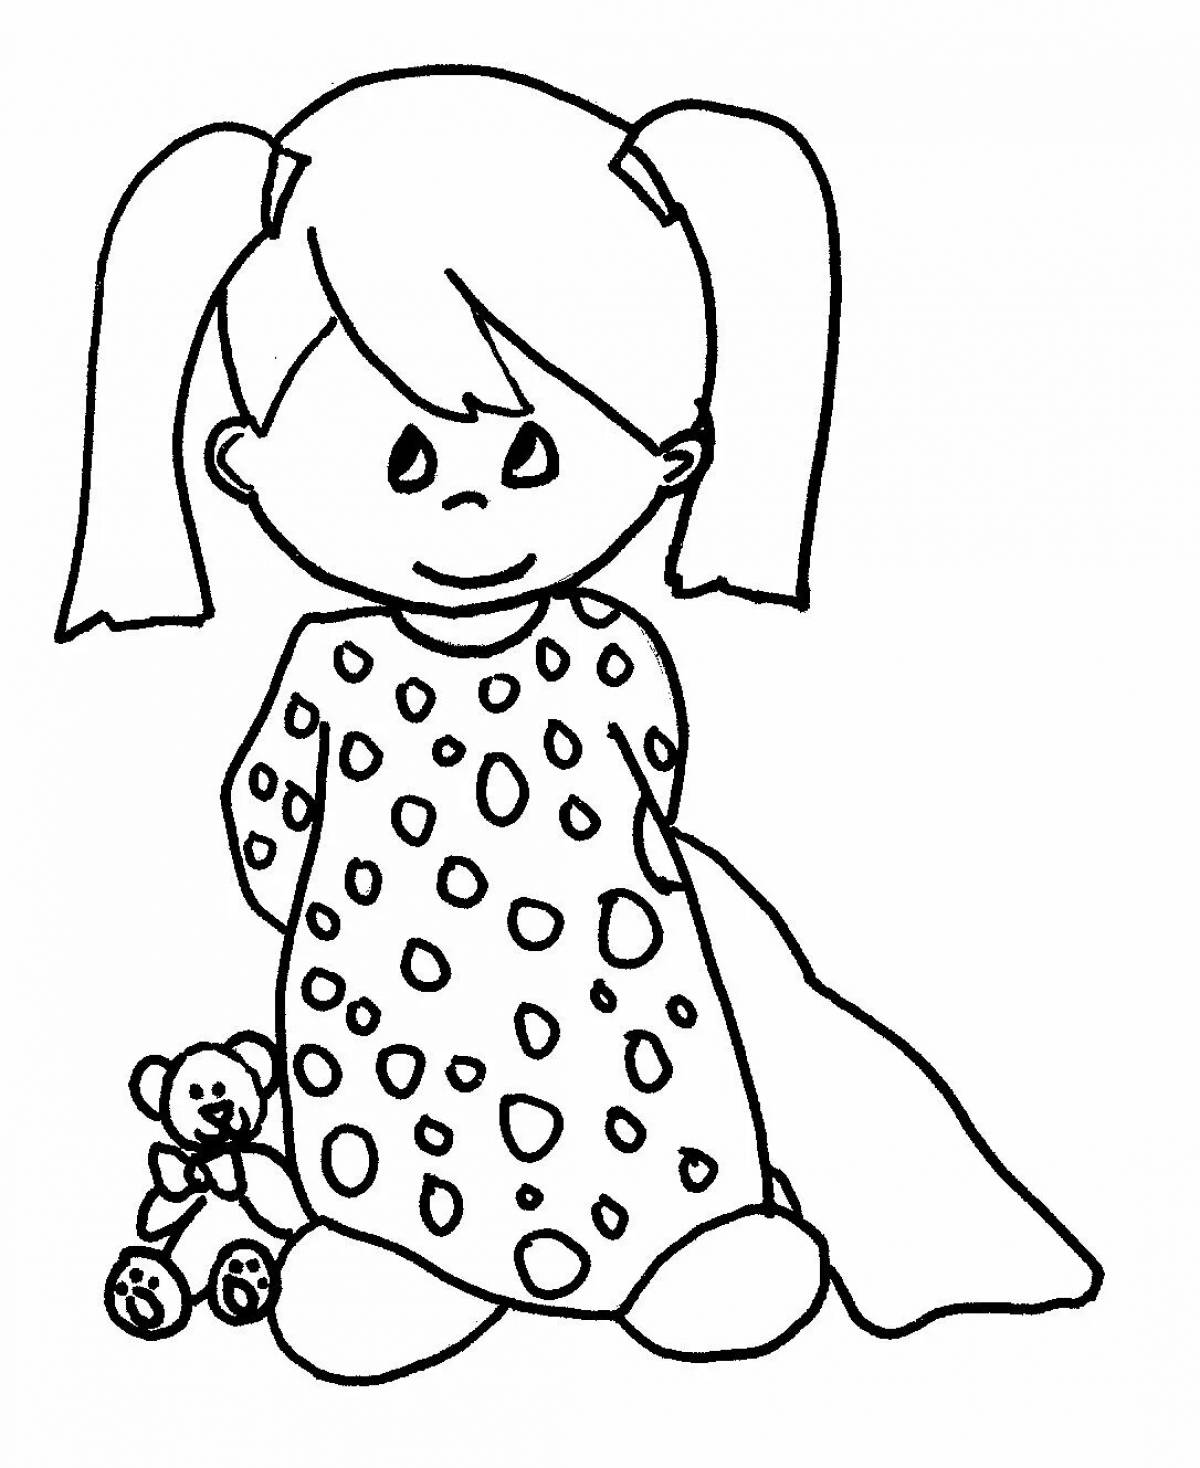 Dazzling color how to draw coloring pages